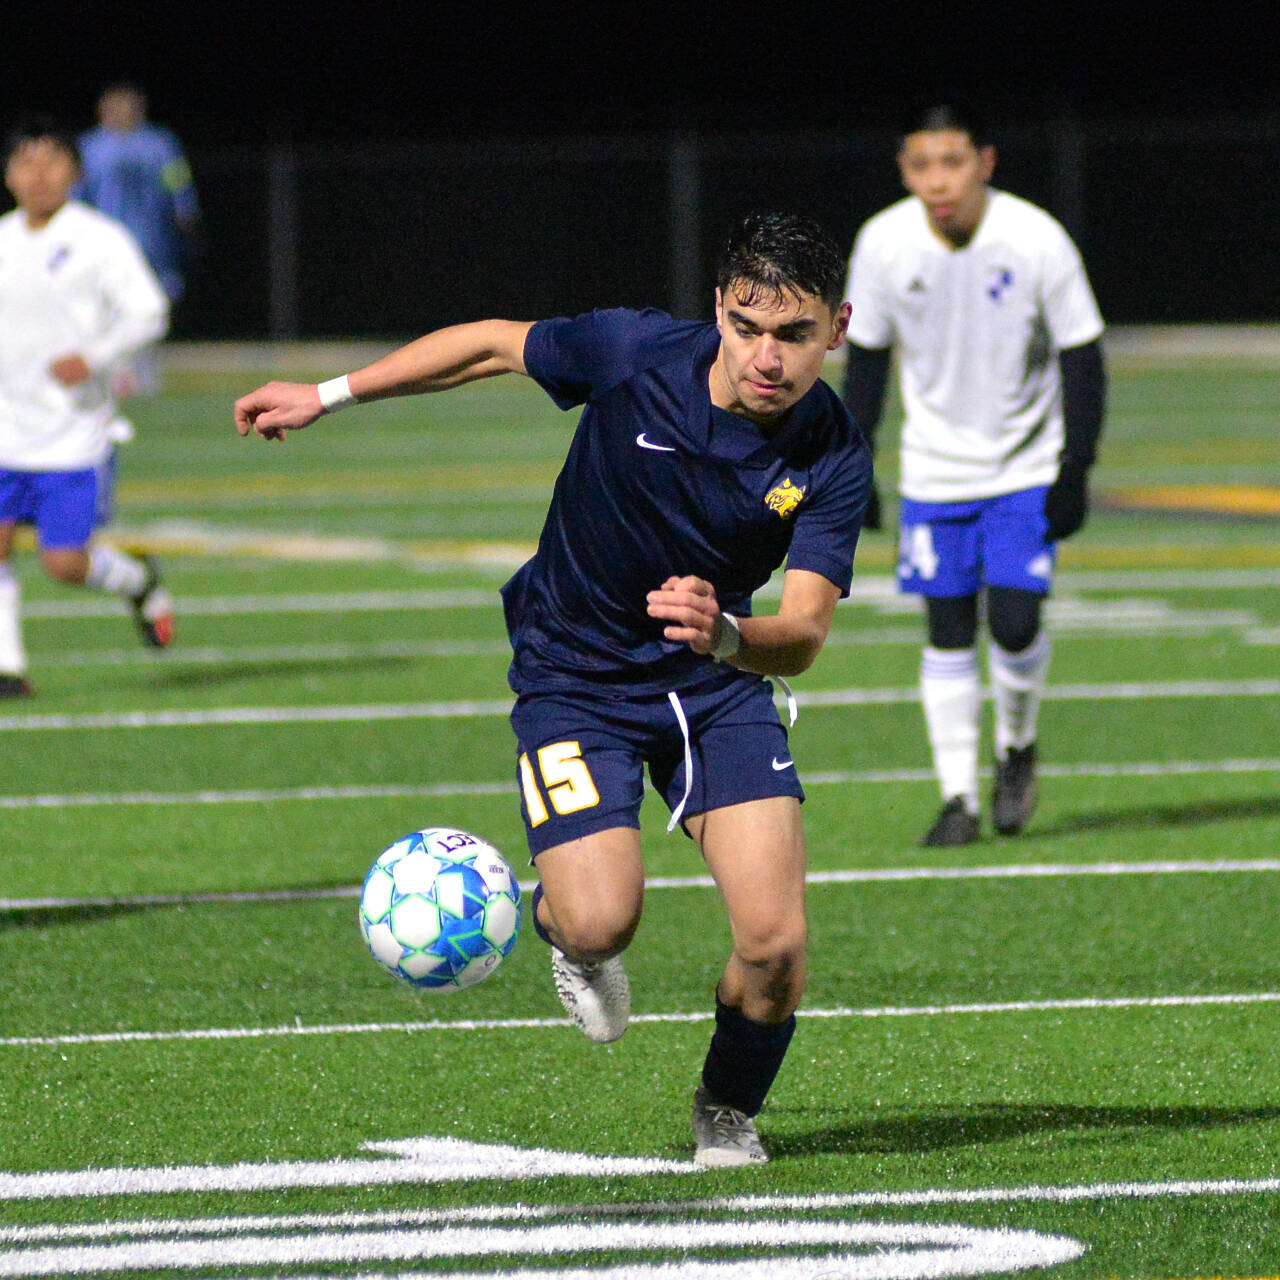 RYAN SPARKS | THE DAILY WORLD Aberdeen forward Carlos Mendoza pushes the ball forward in the second half of the Bobcats’ 3-0 win over Elma on Monday in Aberdeen.